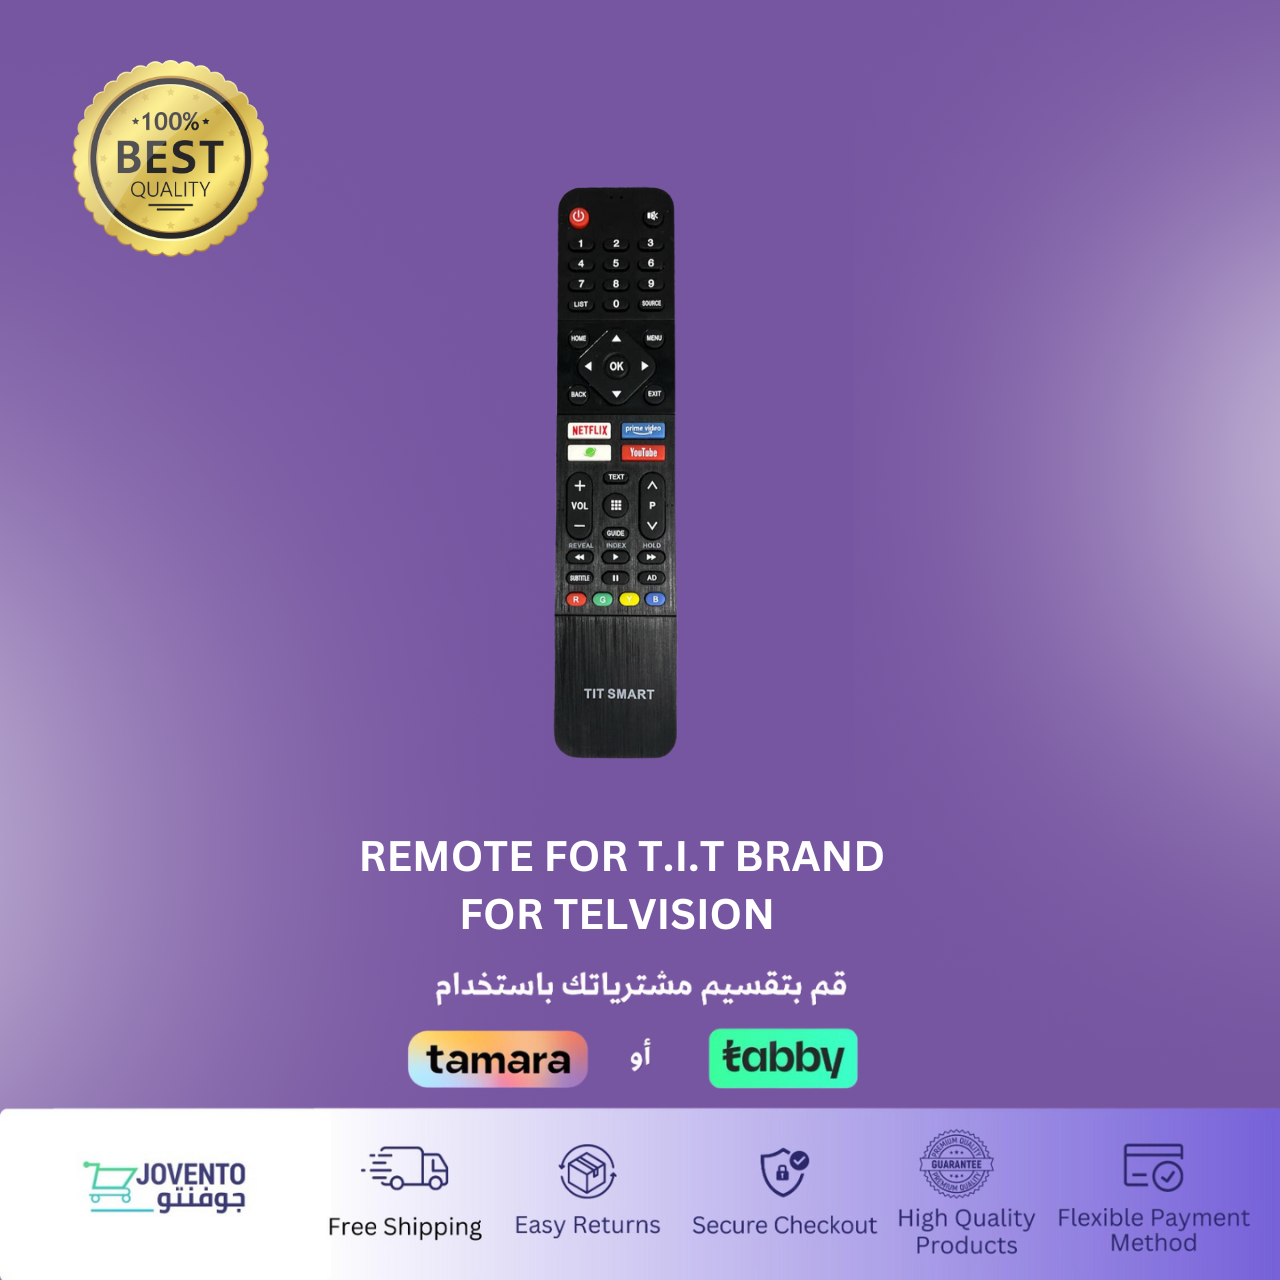 NATE REMOTE FOR T.I.T BRAND FOR TELVISION